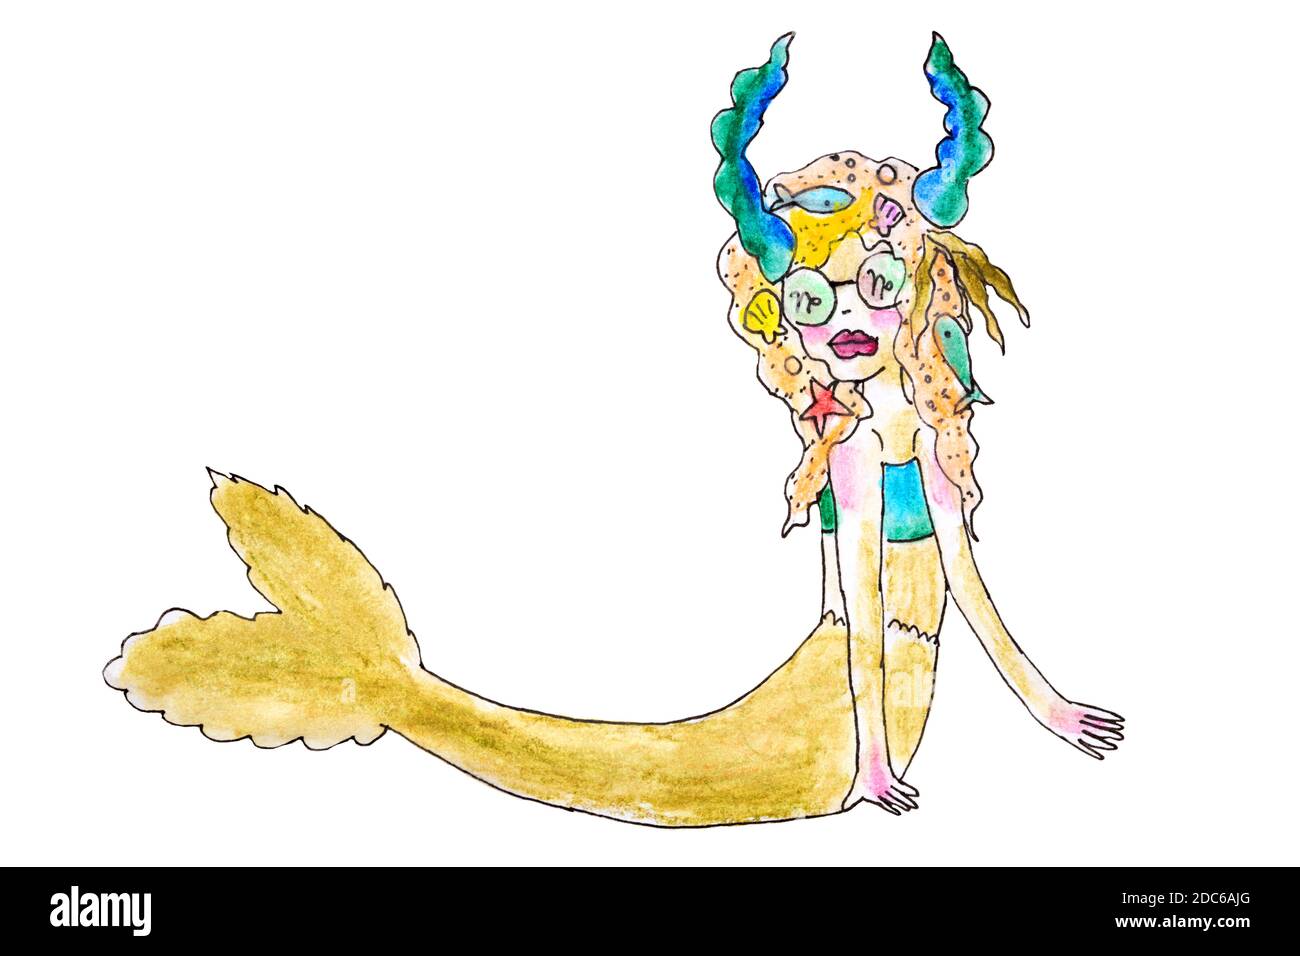 mermaid with green horns on a white background Stock Photo